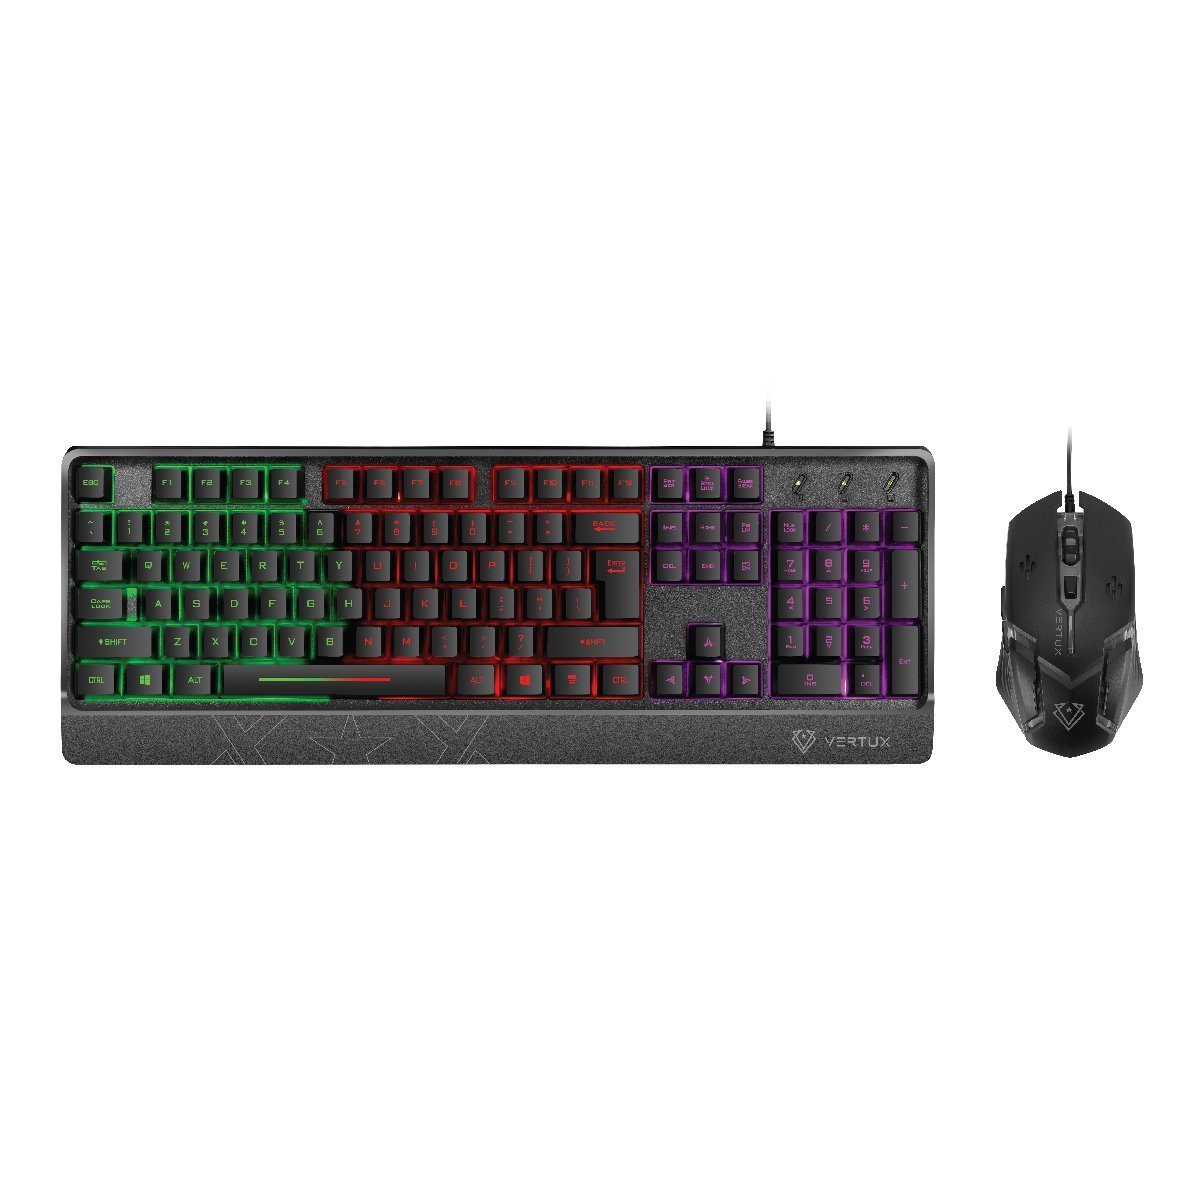 Vertux Orion Ergonomic Backlit Wired Keyboard & Mouse - Black - Store 974 | ستور ٩٧٤